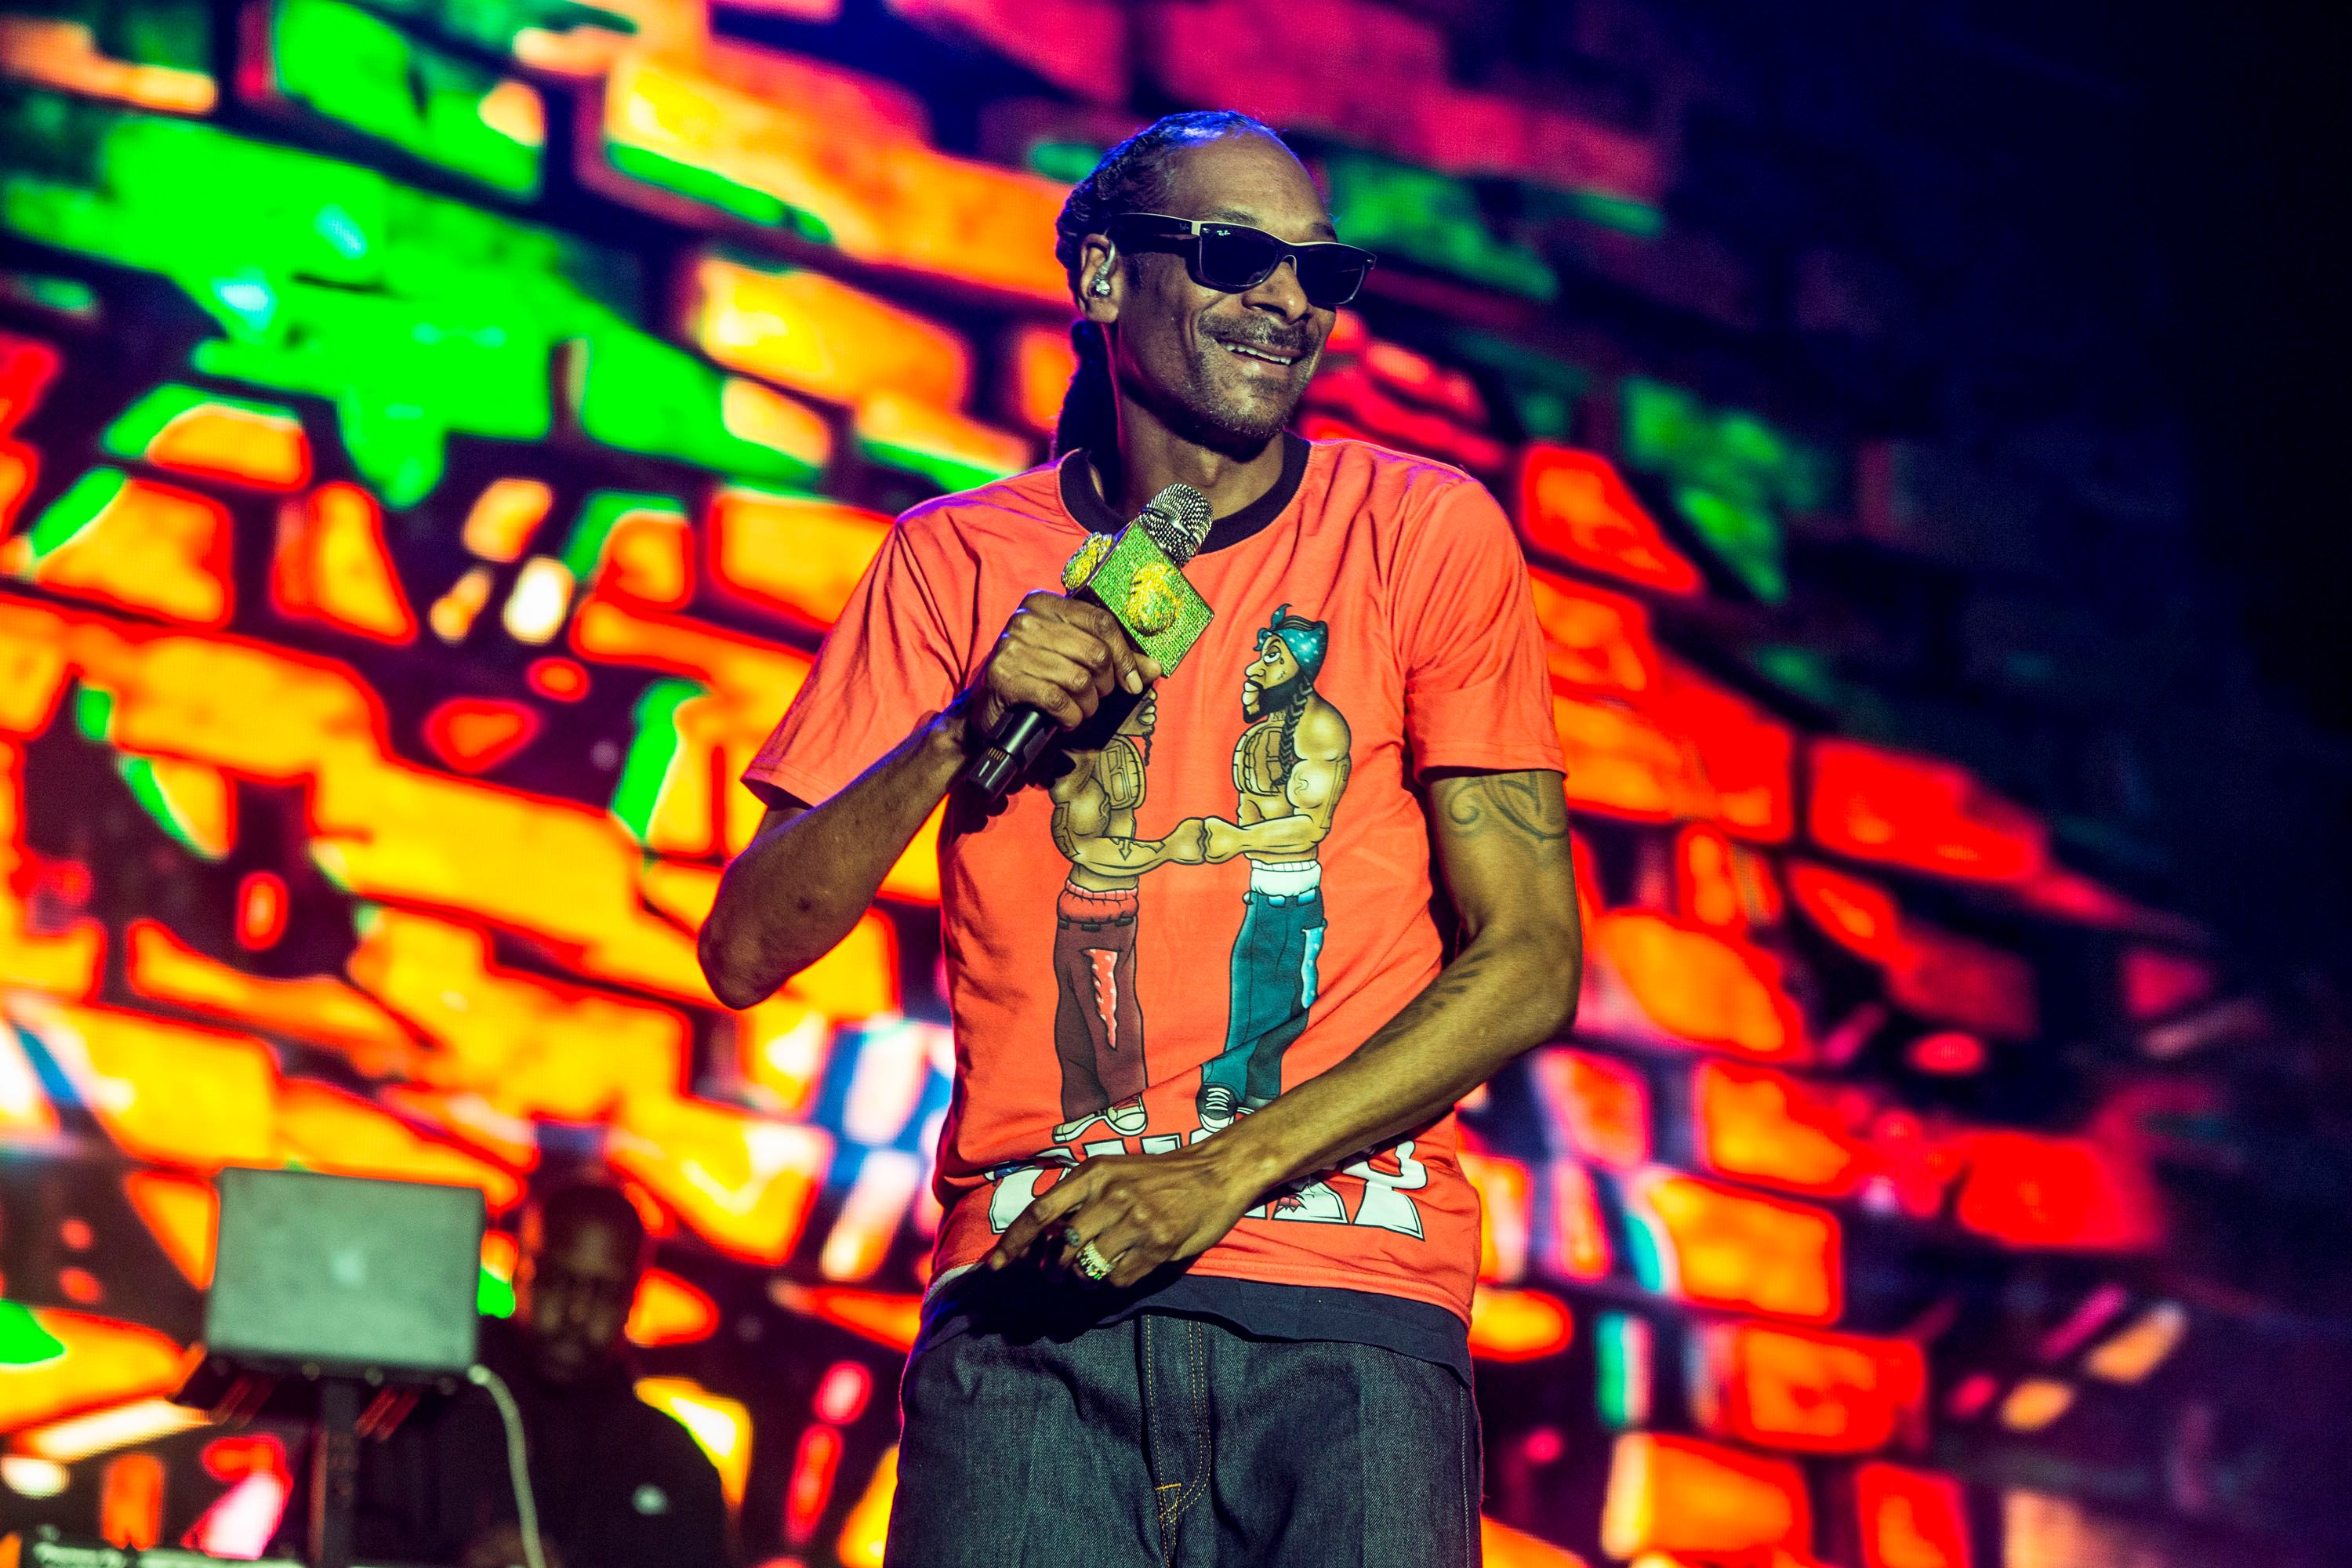 Snoop Dogg at the Del Mar Race Track on September 13, 2019 in California. | Photo: Getty Images